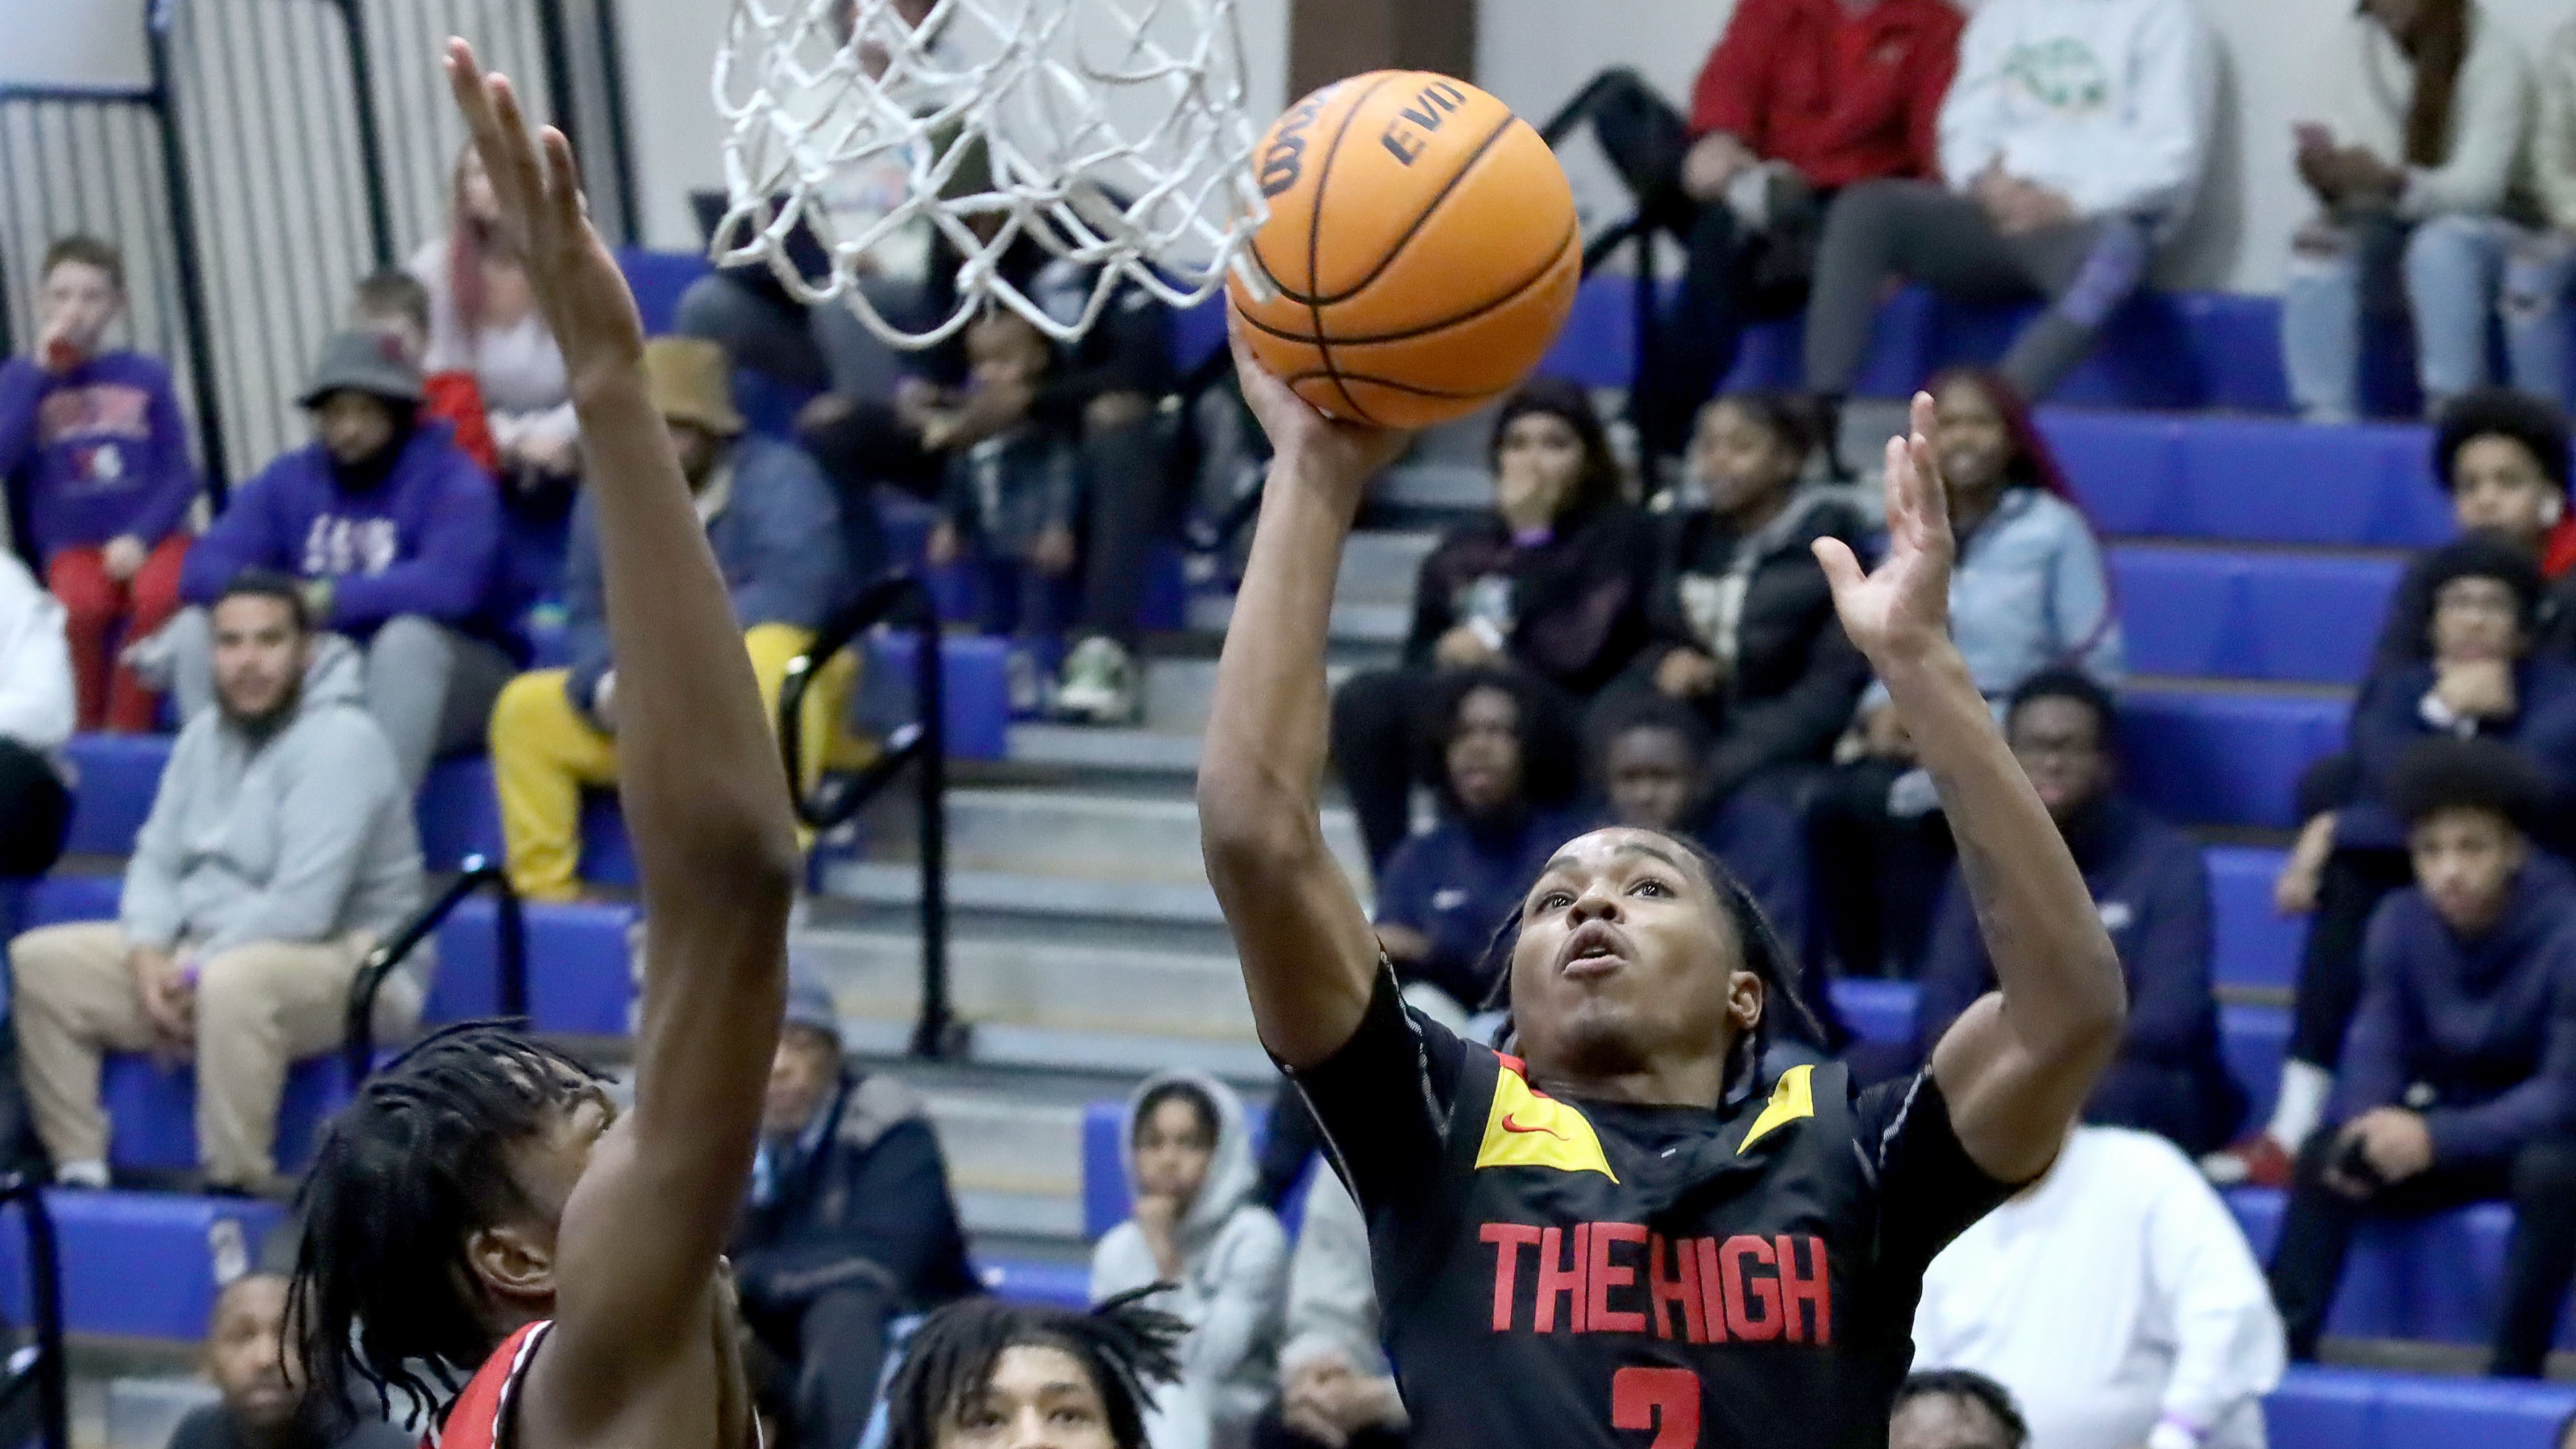 Undefeated Simeon tops Imhotep in nationally-ranked showdown at